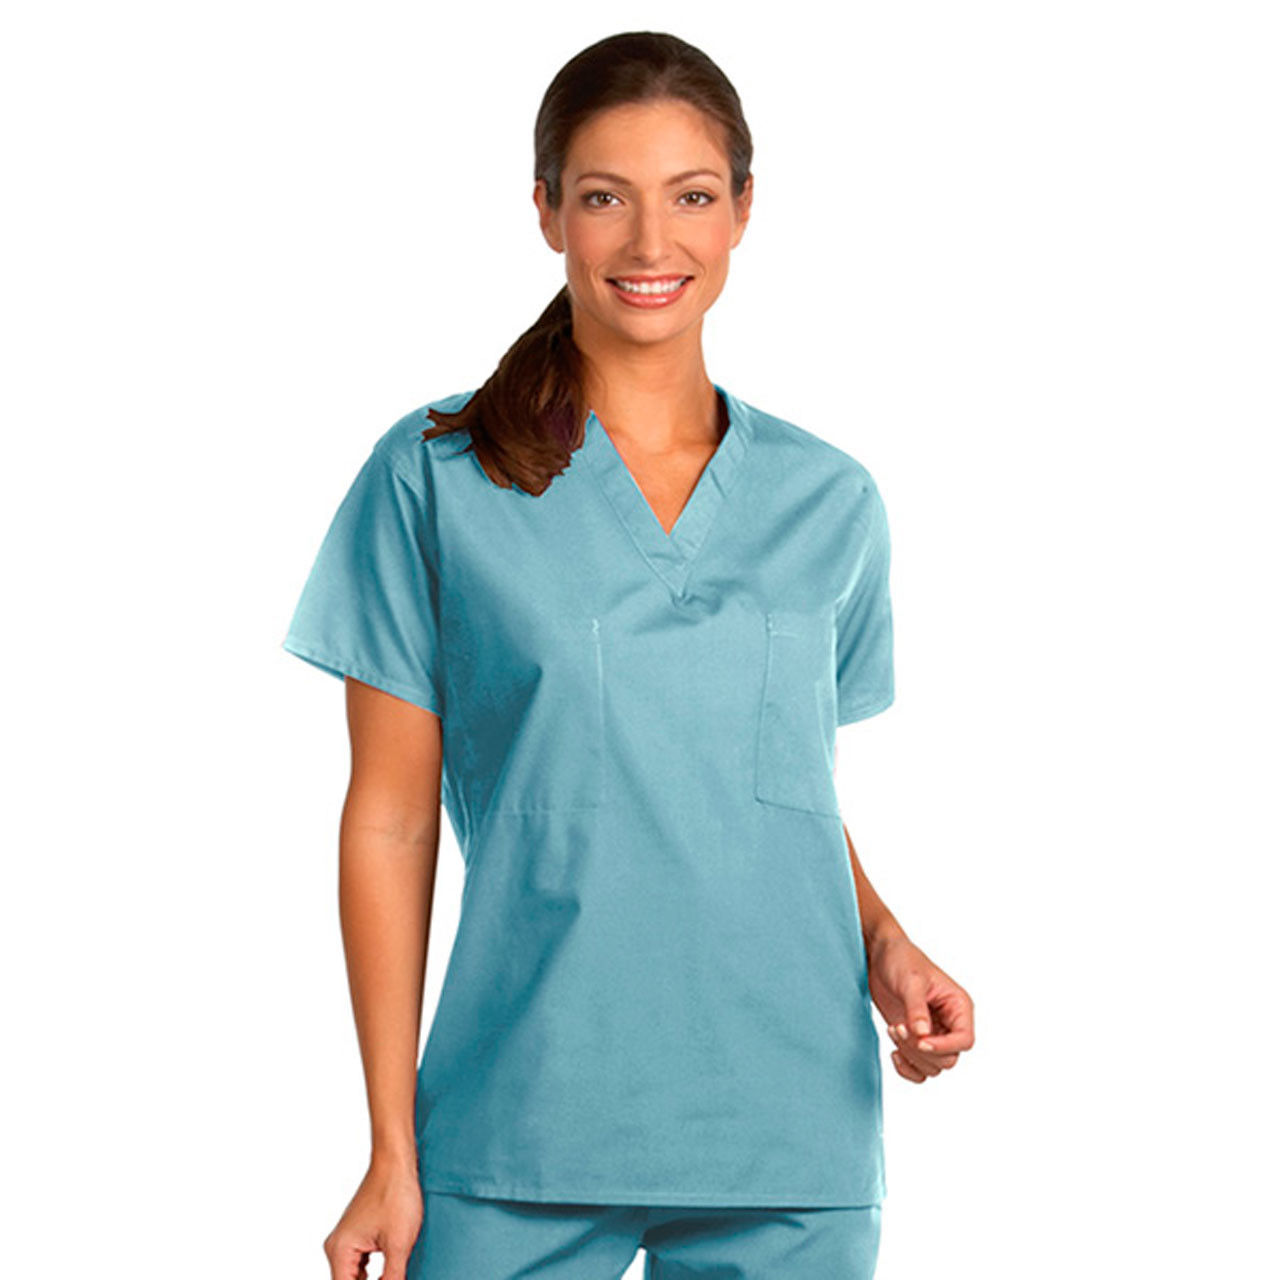 Unisex Surgical Scrub Sets, with Pocket, Misty Green - In Bulk of 12 or 72 Questions & Answers